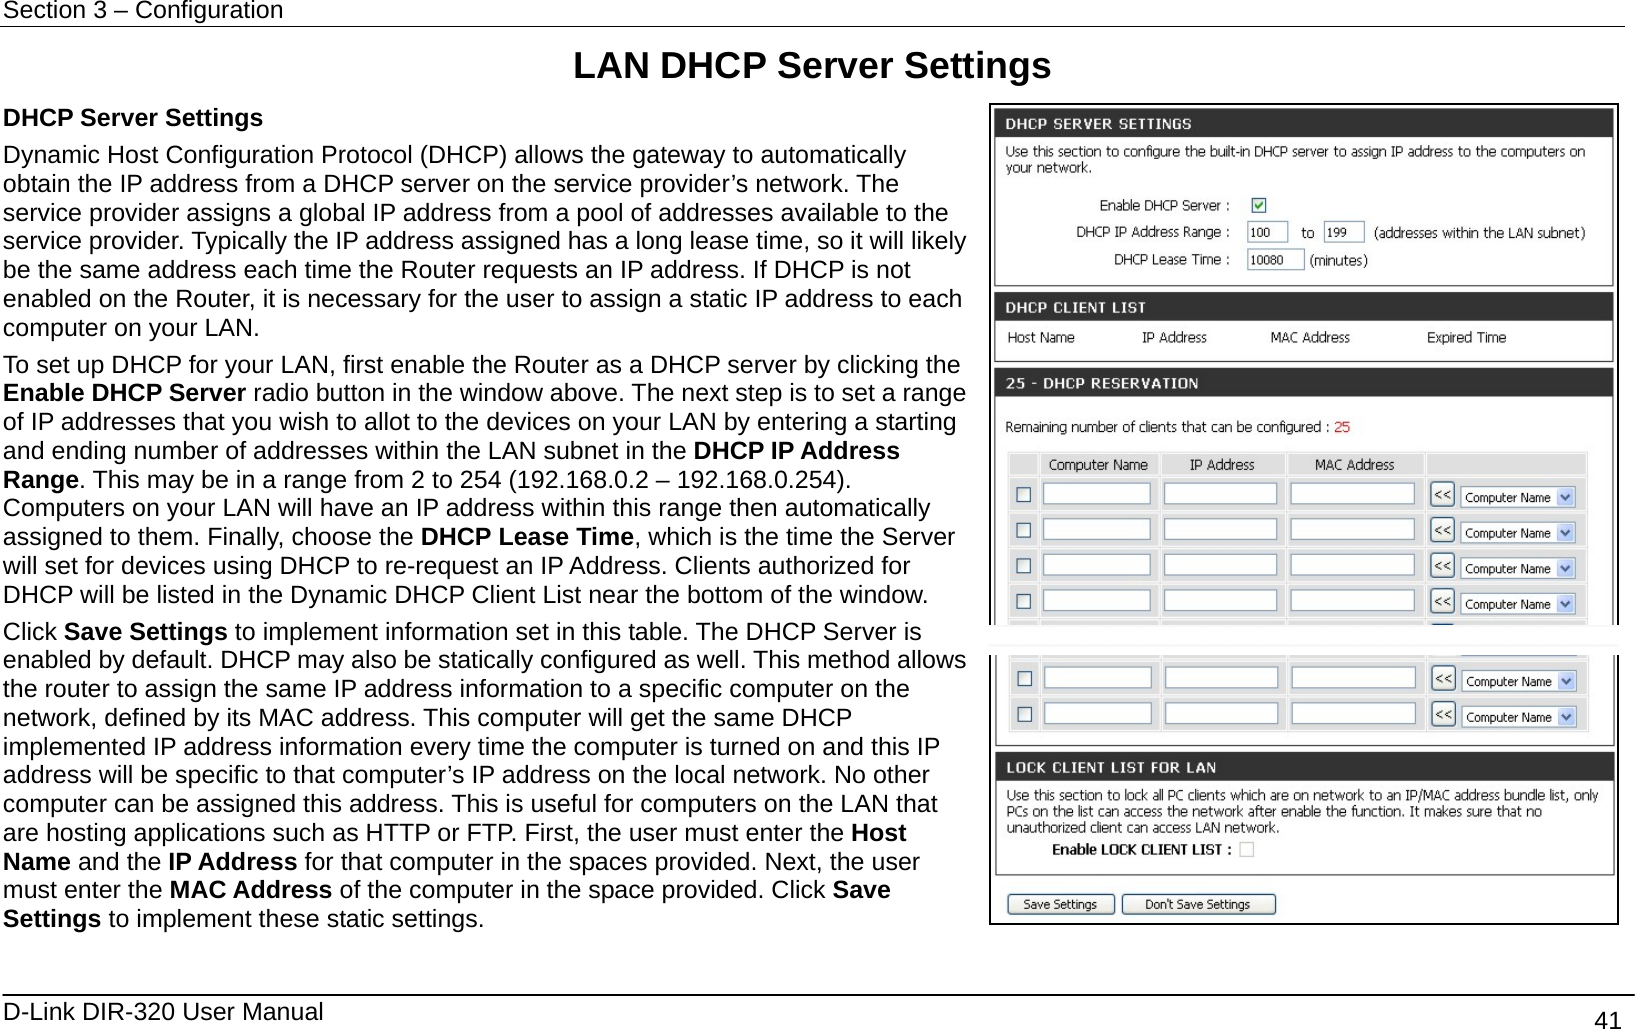 Section 3 – Configuration   D-Link DIR-320 User Manual                                       41 LAN DHCP Server Settings DHCP Server Settings Dynamic Host Configuration Protocol (DHCP) allows the gateway to automatically obtain the IP address from a DHCP server on the service provider’s network. The service provider assigns a global IP address from a pool of addresses available to the service provider. Typically the IP address assigned has a long lease time, so it will likely be the same address each time the Router requests an IP address. If DHCP is not enabled on the Router, it is necessary for the user to assign a static IP address to each computer on your LAN. To set up DHCP for your LAN, first enable the Router as a DHCP server by clicking the Enable DHCP Server radio button in the window above. The next step is to set a range of IP addresses that you wish to allot to the devices on your LAN by entering a starting and ending number of addresses within the LAN subnet in the DHCP IP Address Range. This may be in a range from 2 to 254 (192.168.0.2 – 192.168.0.254). Computers on your LAN will have an IP address within this range then automatically assigned to them. Finally, choose the DHCP Lease Time, which is the time the Server will set for devices using DHCP to re-request an IP Address. Clients authorized for DHCP will be listed in the Dynamic DHCP Client List near the bottom of the window. Click Save Settings to implement information set in this table. The DHCP Server is enabled by default. DHCP may also be statically configured as well. This method allows the router to assign the same IP address information to a specific computer on the network, defined by its MAC address. This computer will get the same DHCP implemented IP address information every time the computer is turned on and this IP address will be specific to that computer’s IP address on the local network. No other computer can be assigned this address. This is useful for computers on the LAN that are hosting applications such as HTTP or FTP. First, the user must enter the Host Name and the IP Address for that computer in the spaces provided. Next, the user must enter the MAC Address of the computer in the space provided. Click Save Settings to implement these static settings.    